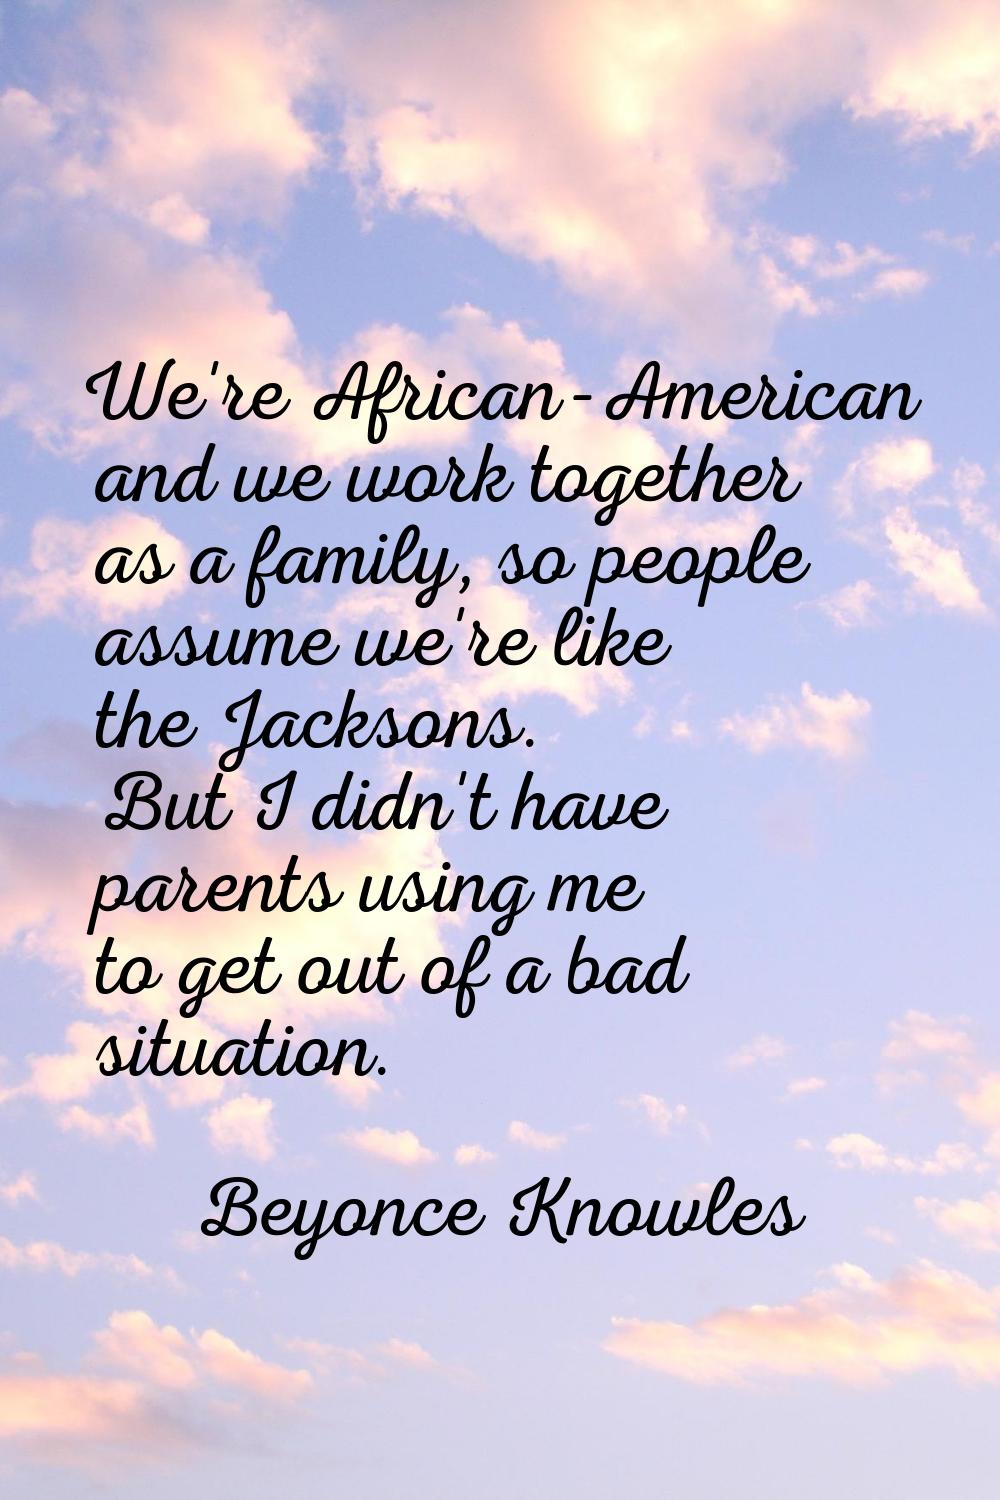 We're African-American and we work together as a family, so people assume we're like the Jacksons. 